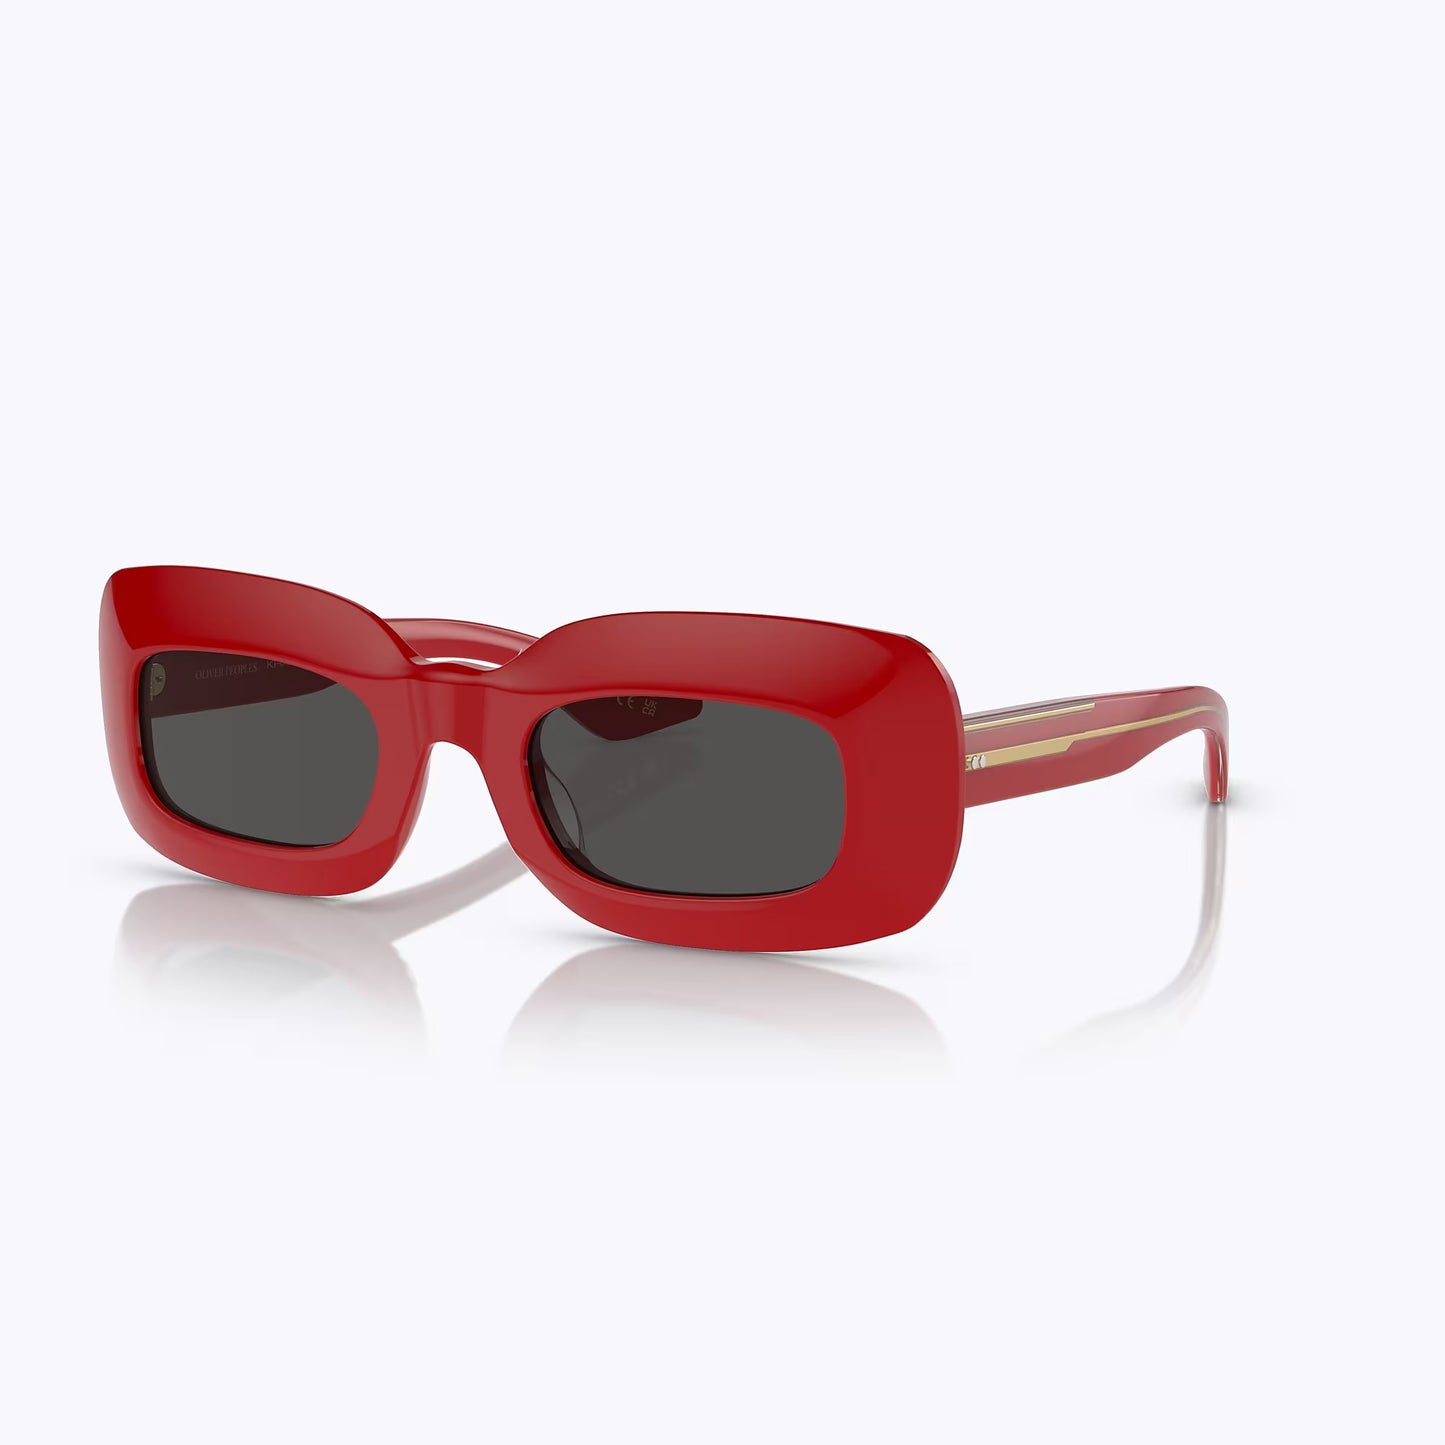 OLIVER PEOPLES 1966C SUN - RED W/GREY